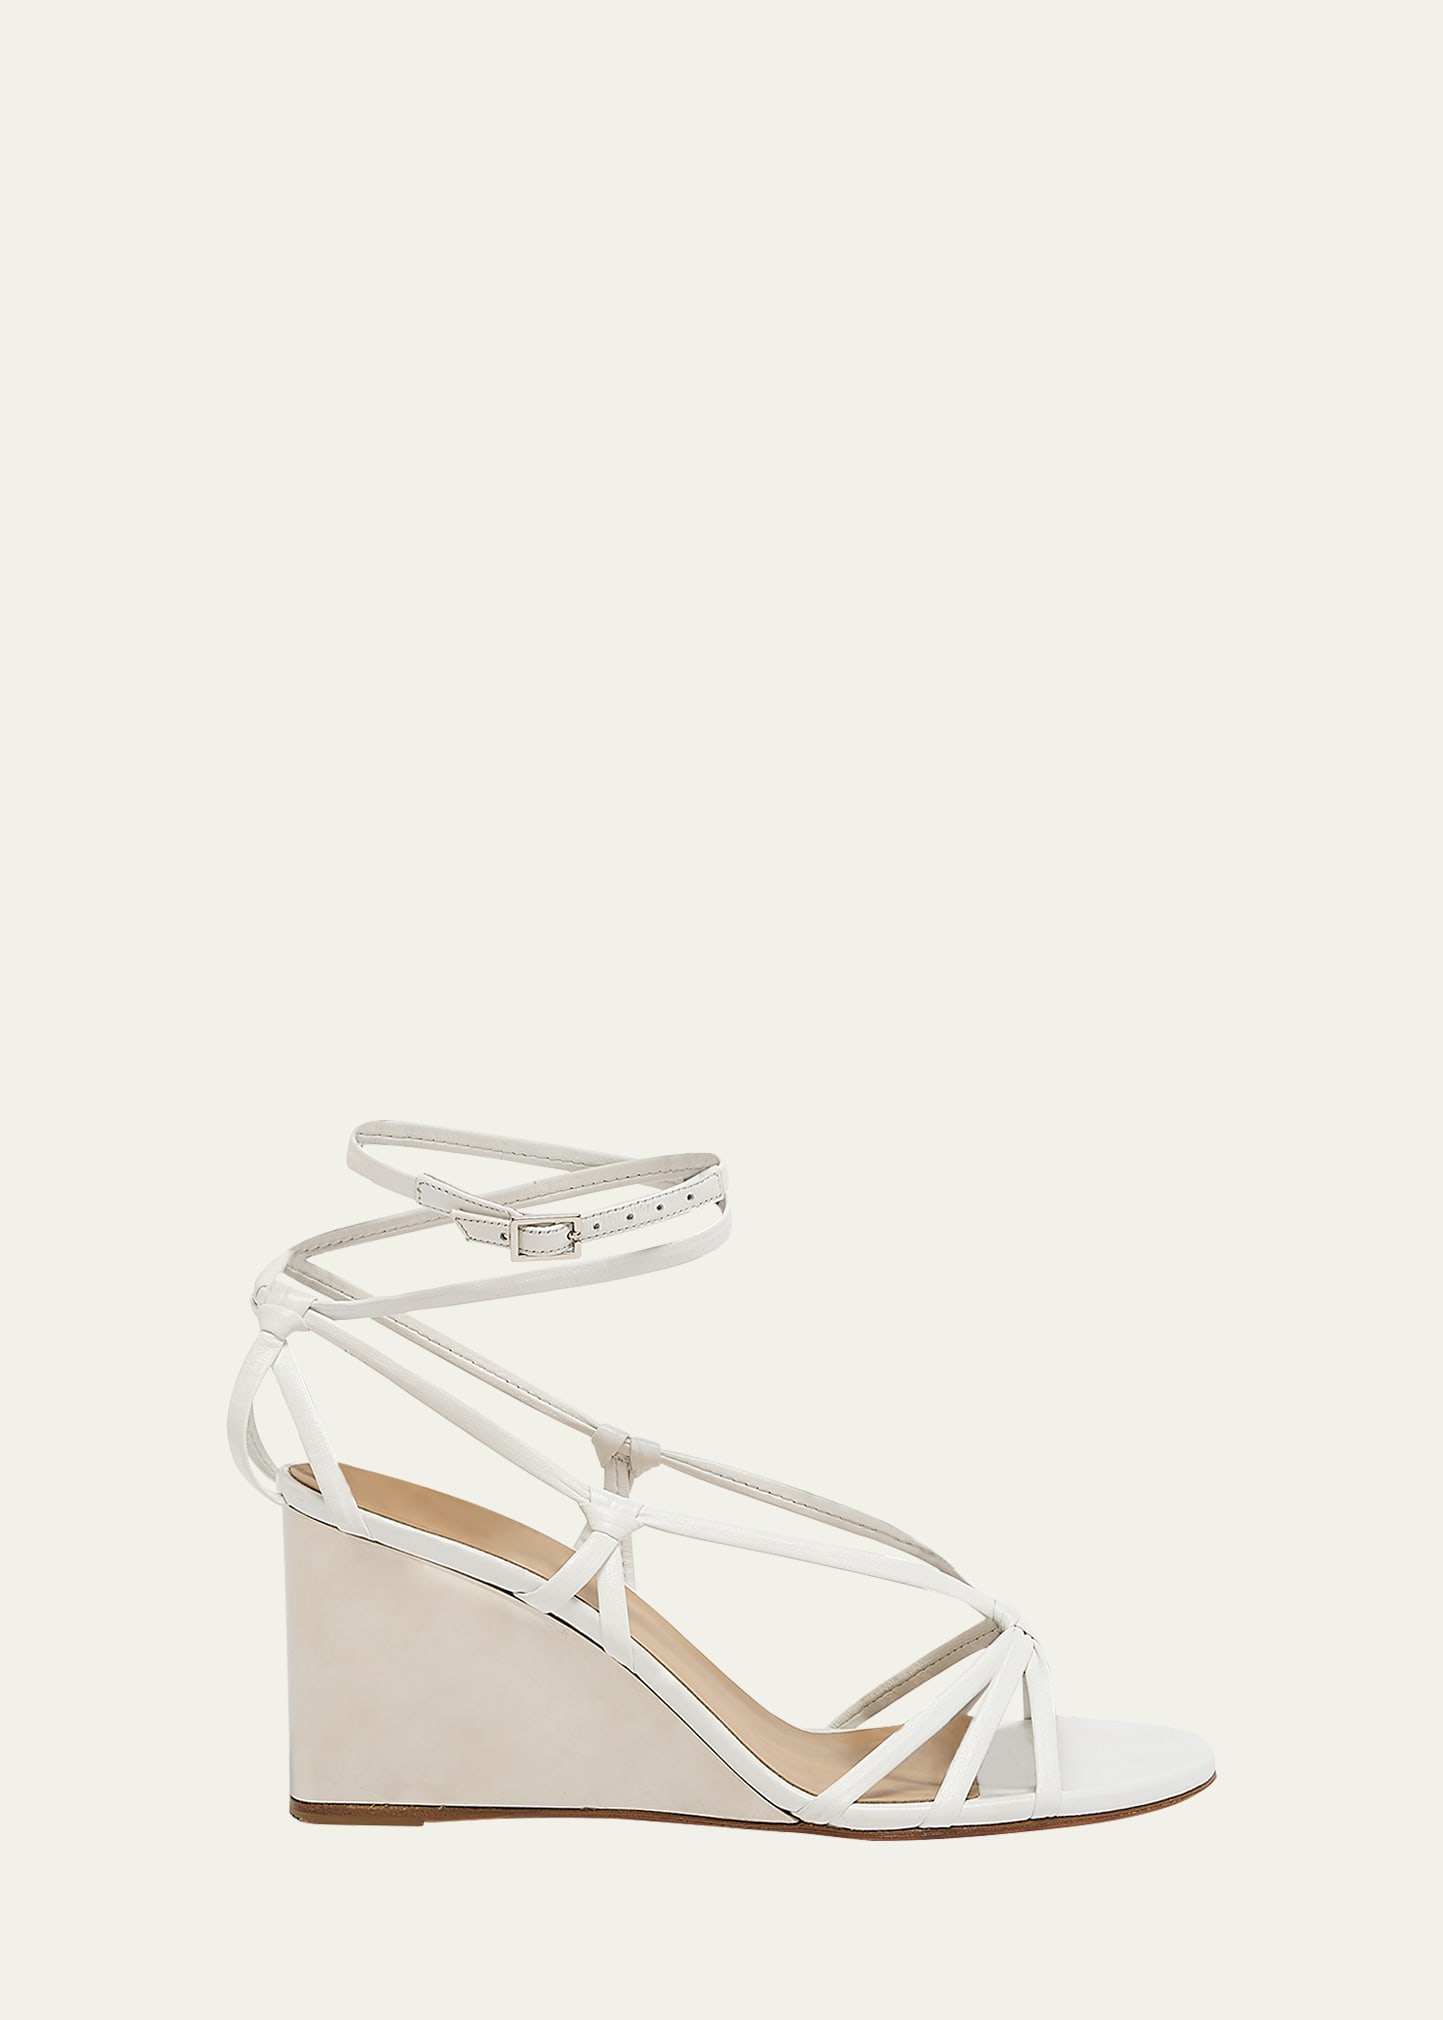 Chloé Rebecca Leather Strappy Wedge Sandals In White